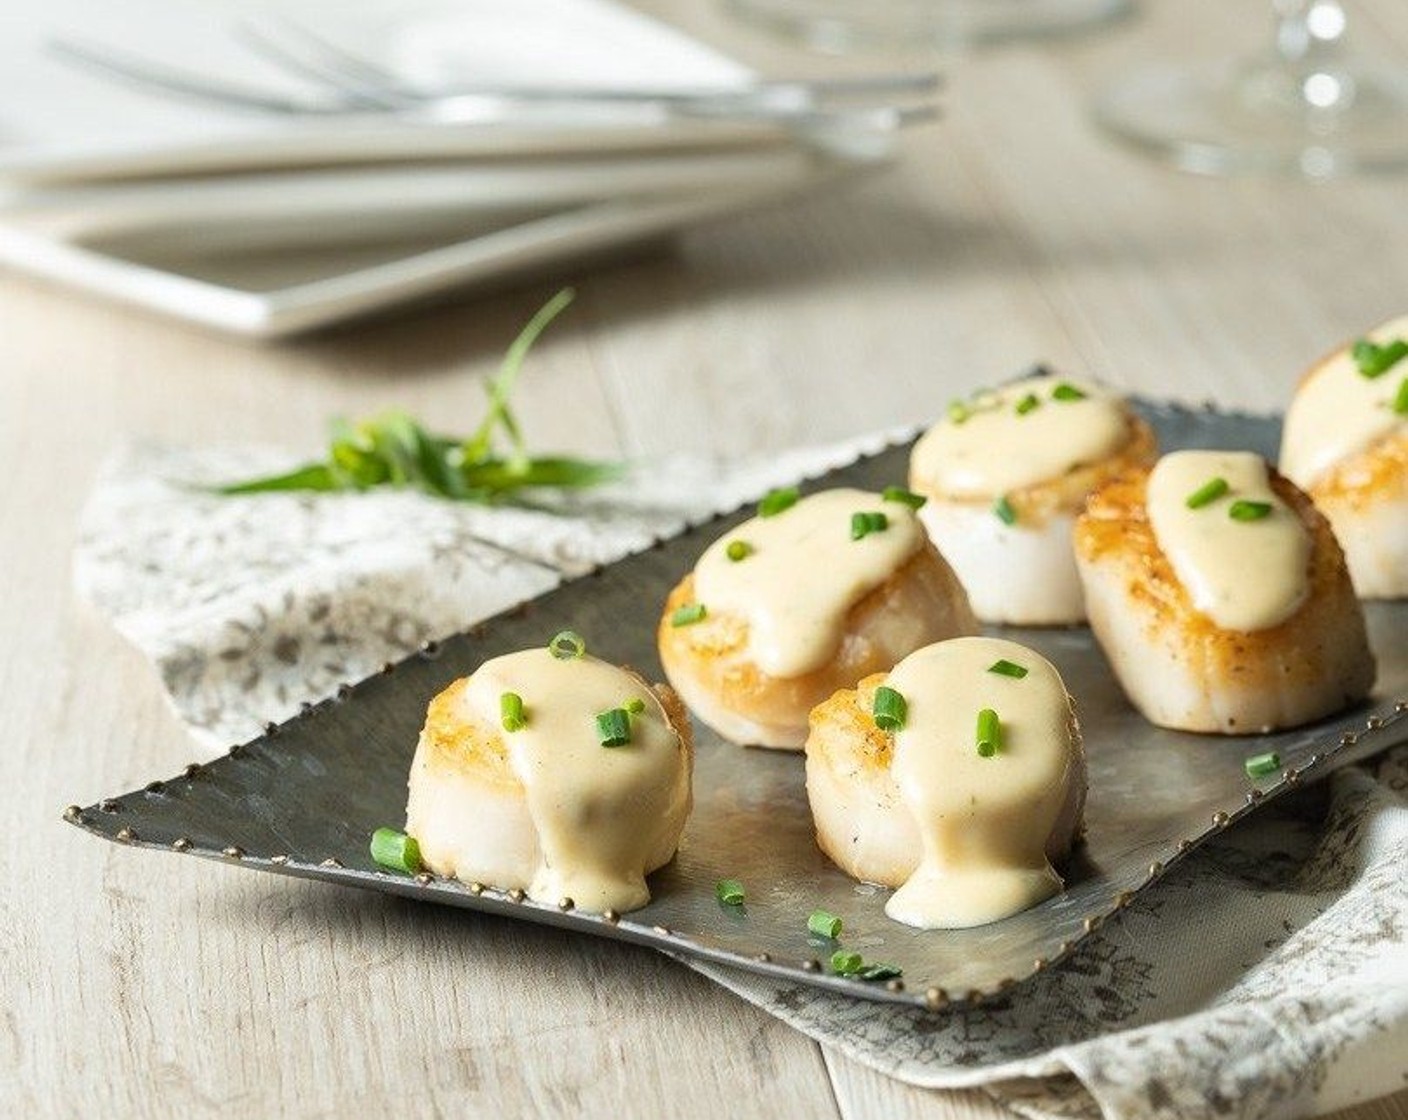 step 6 Arrange scallops on a platter or serving dishes and drizzle each with a tablespoon of sauce. Serve immediately. Also delicious served as a main course over mashed potatoes.